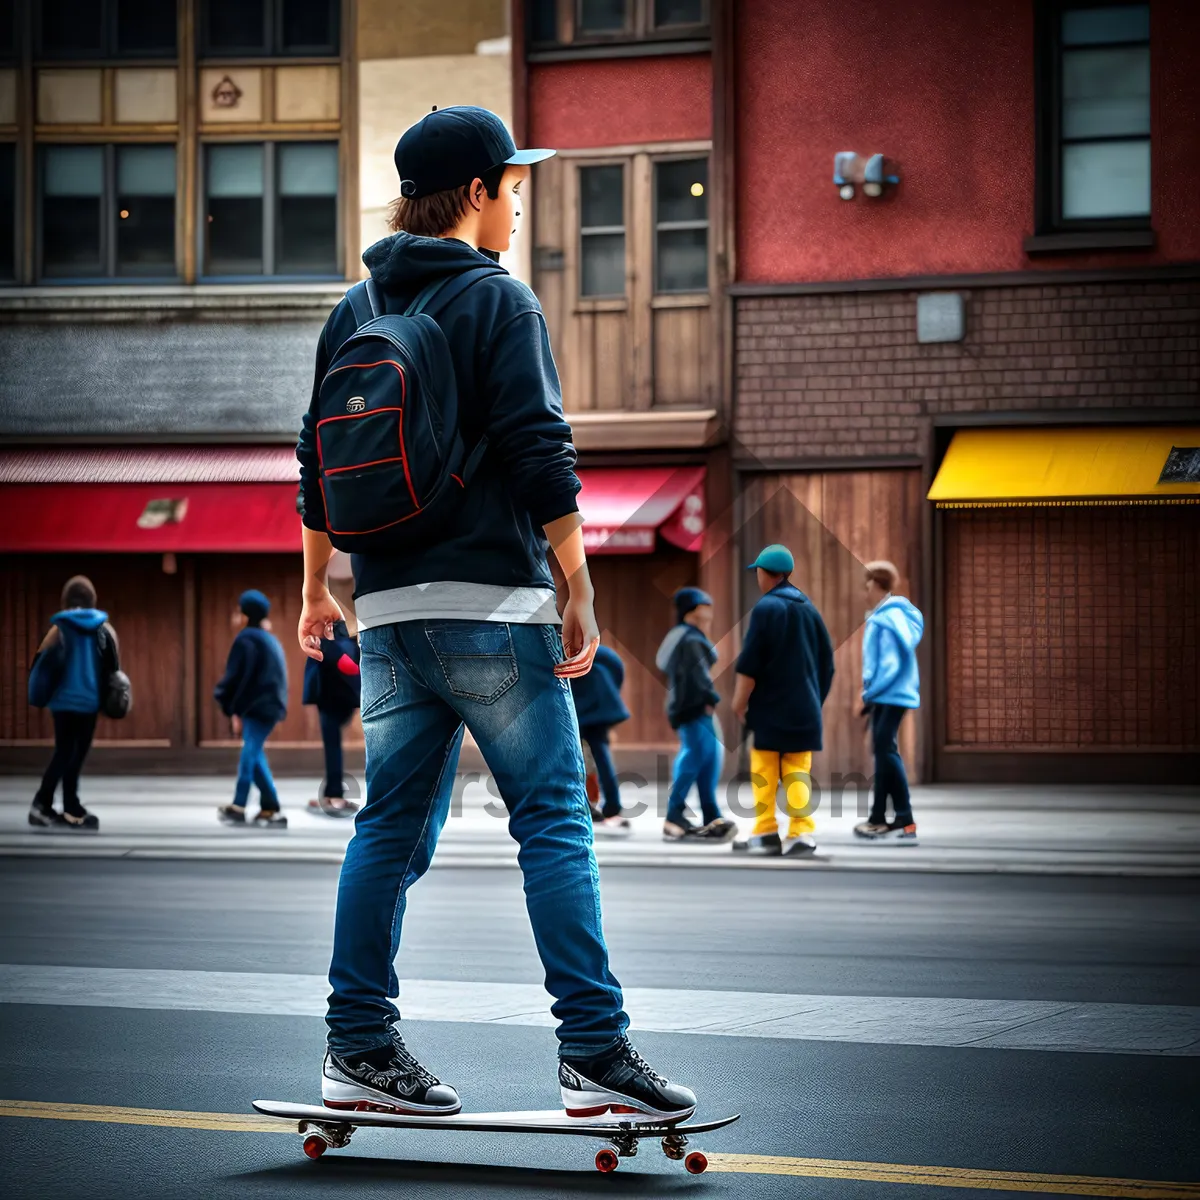 Picture of Active Skateboarding Competition: Man on a wheeled board.